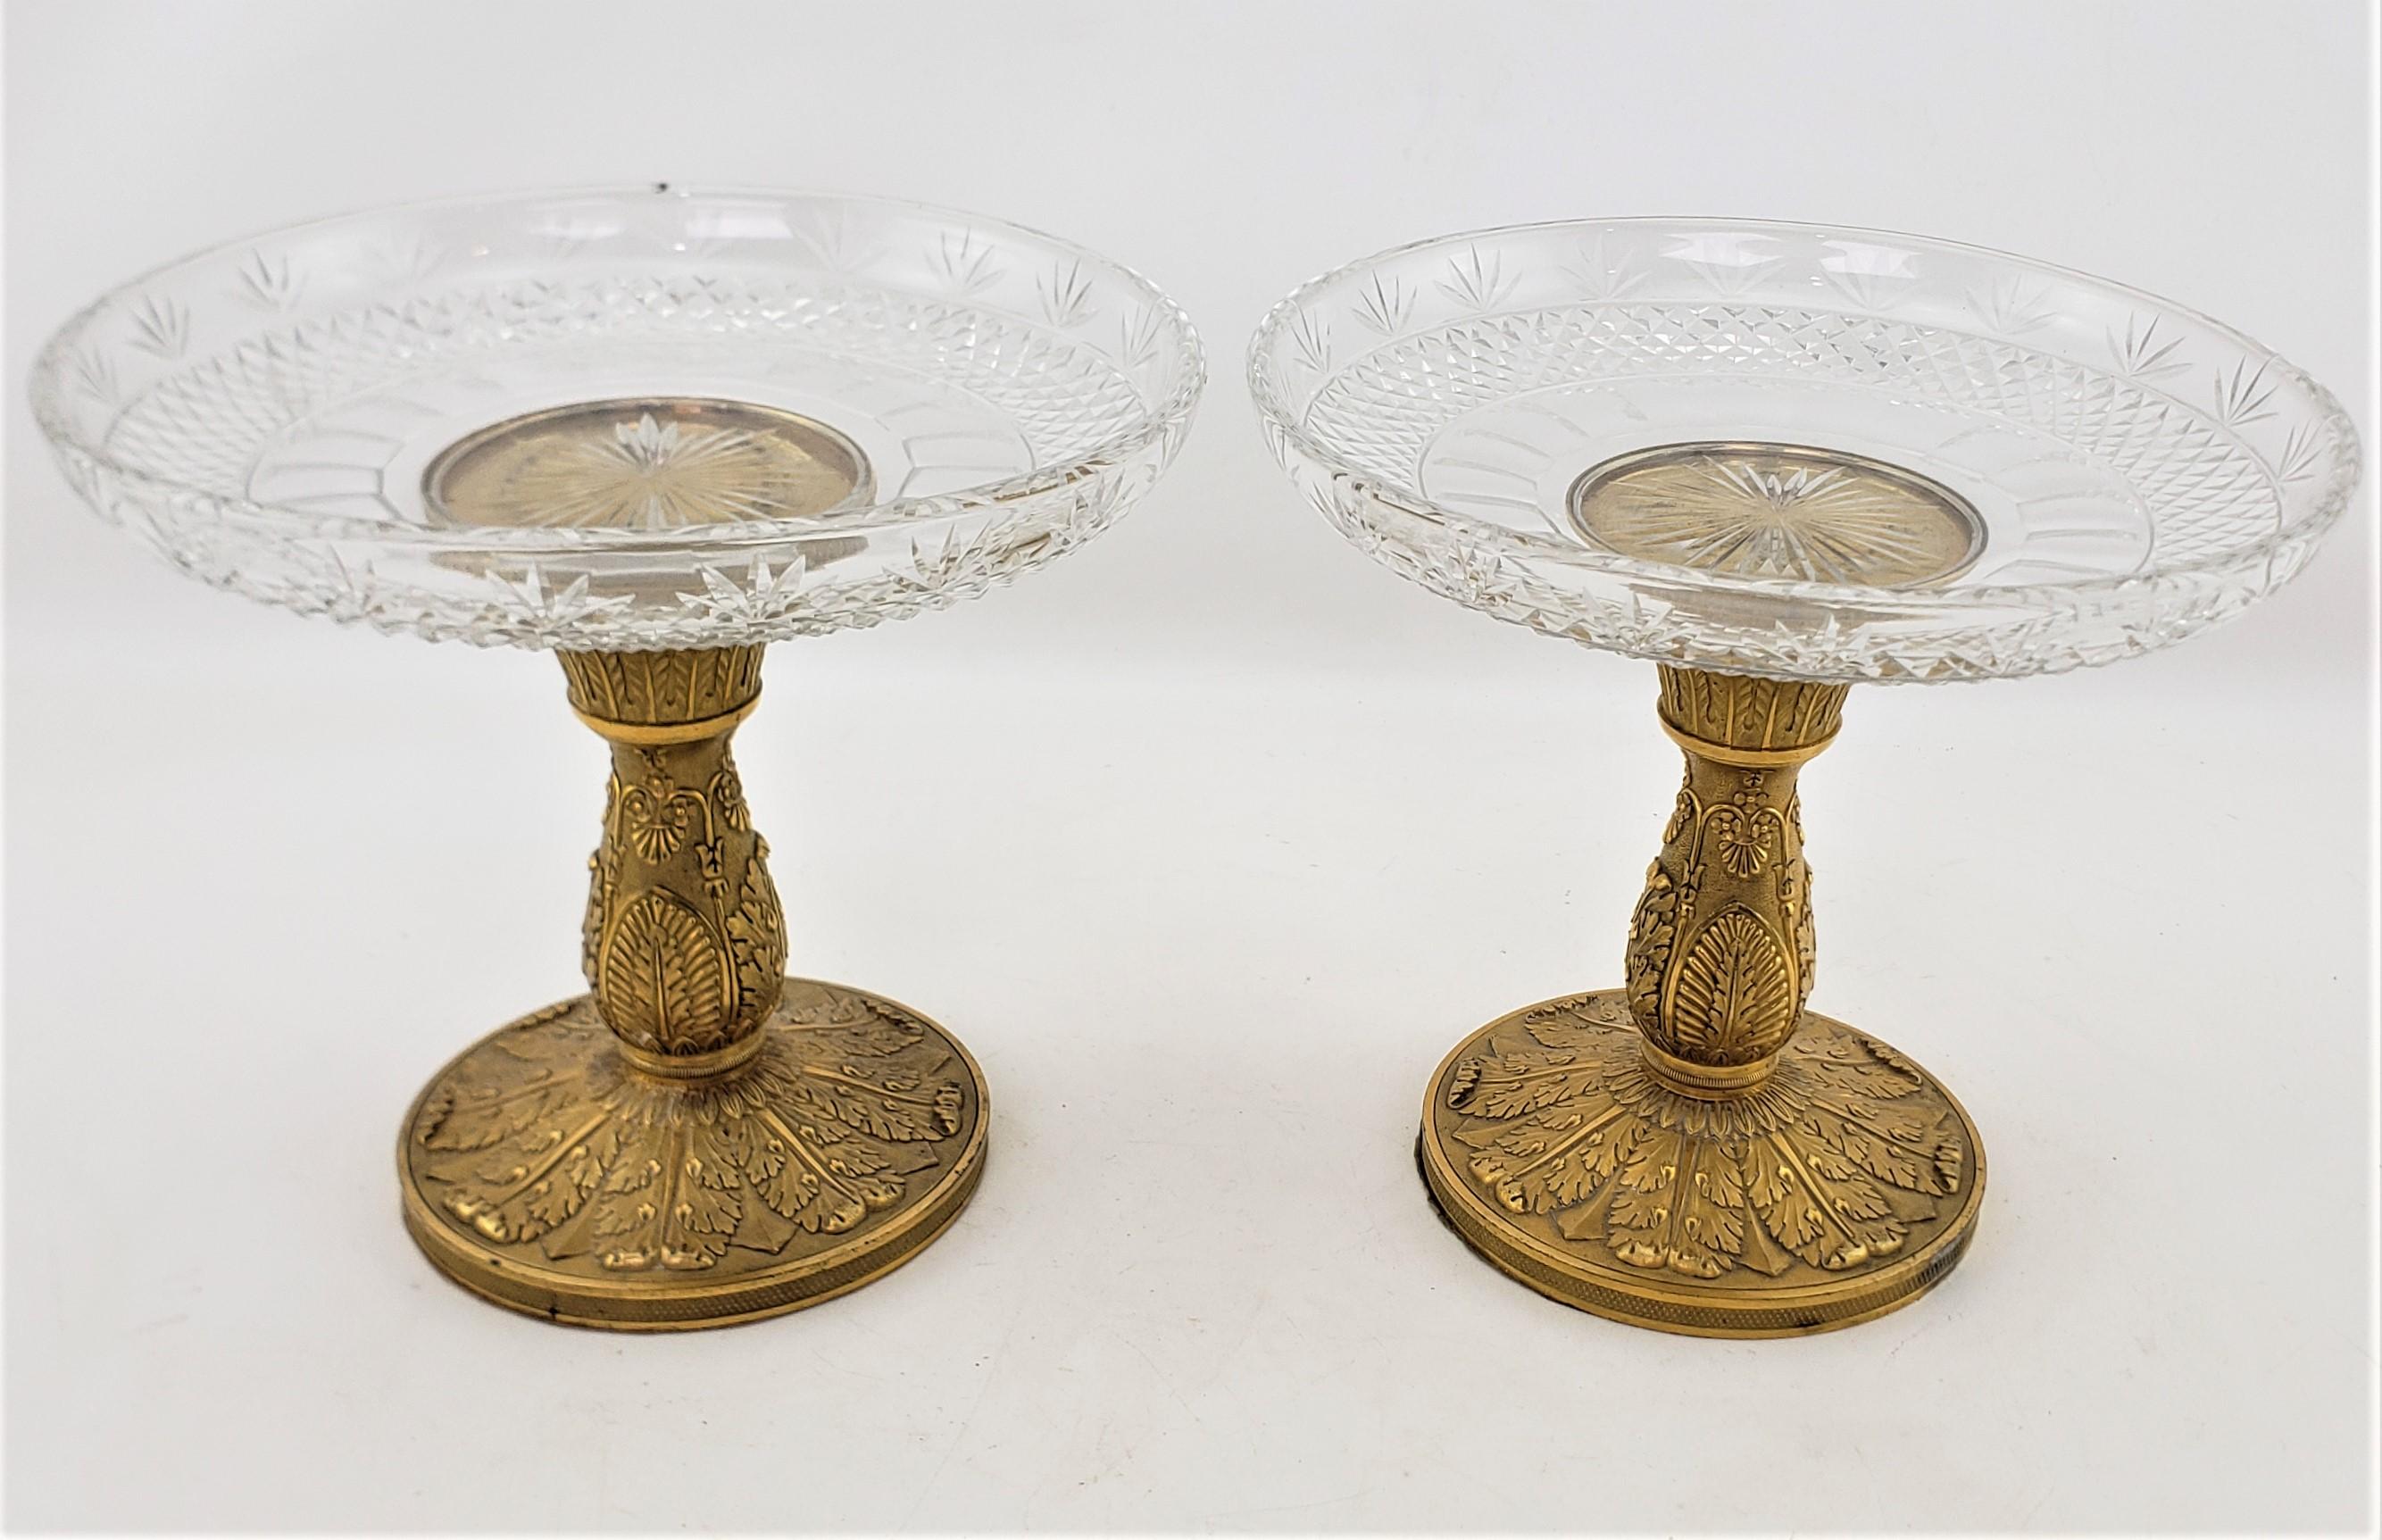 Pair of Antique Gilt Bronze & Crystal Tazzas or Pedestal Bowls For Sale 1